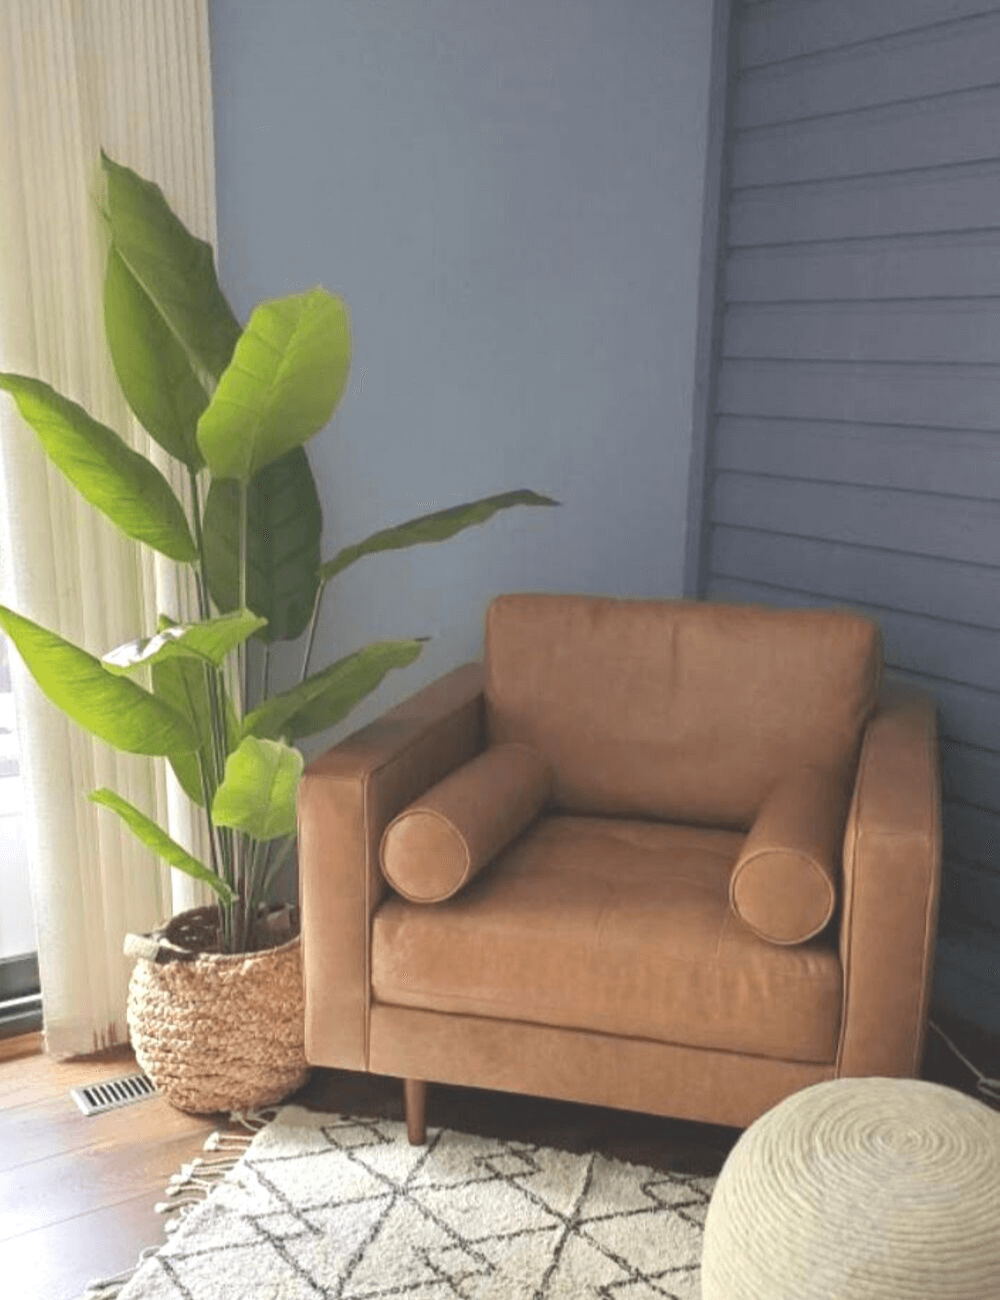 What are the spathiphyllum leaf common problems and why should you have it fake?